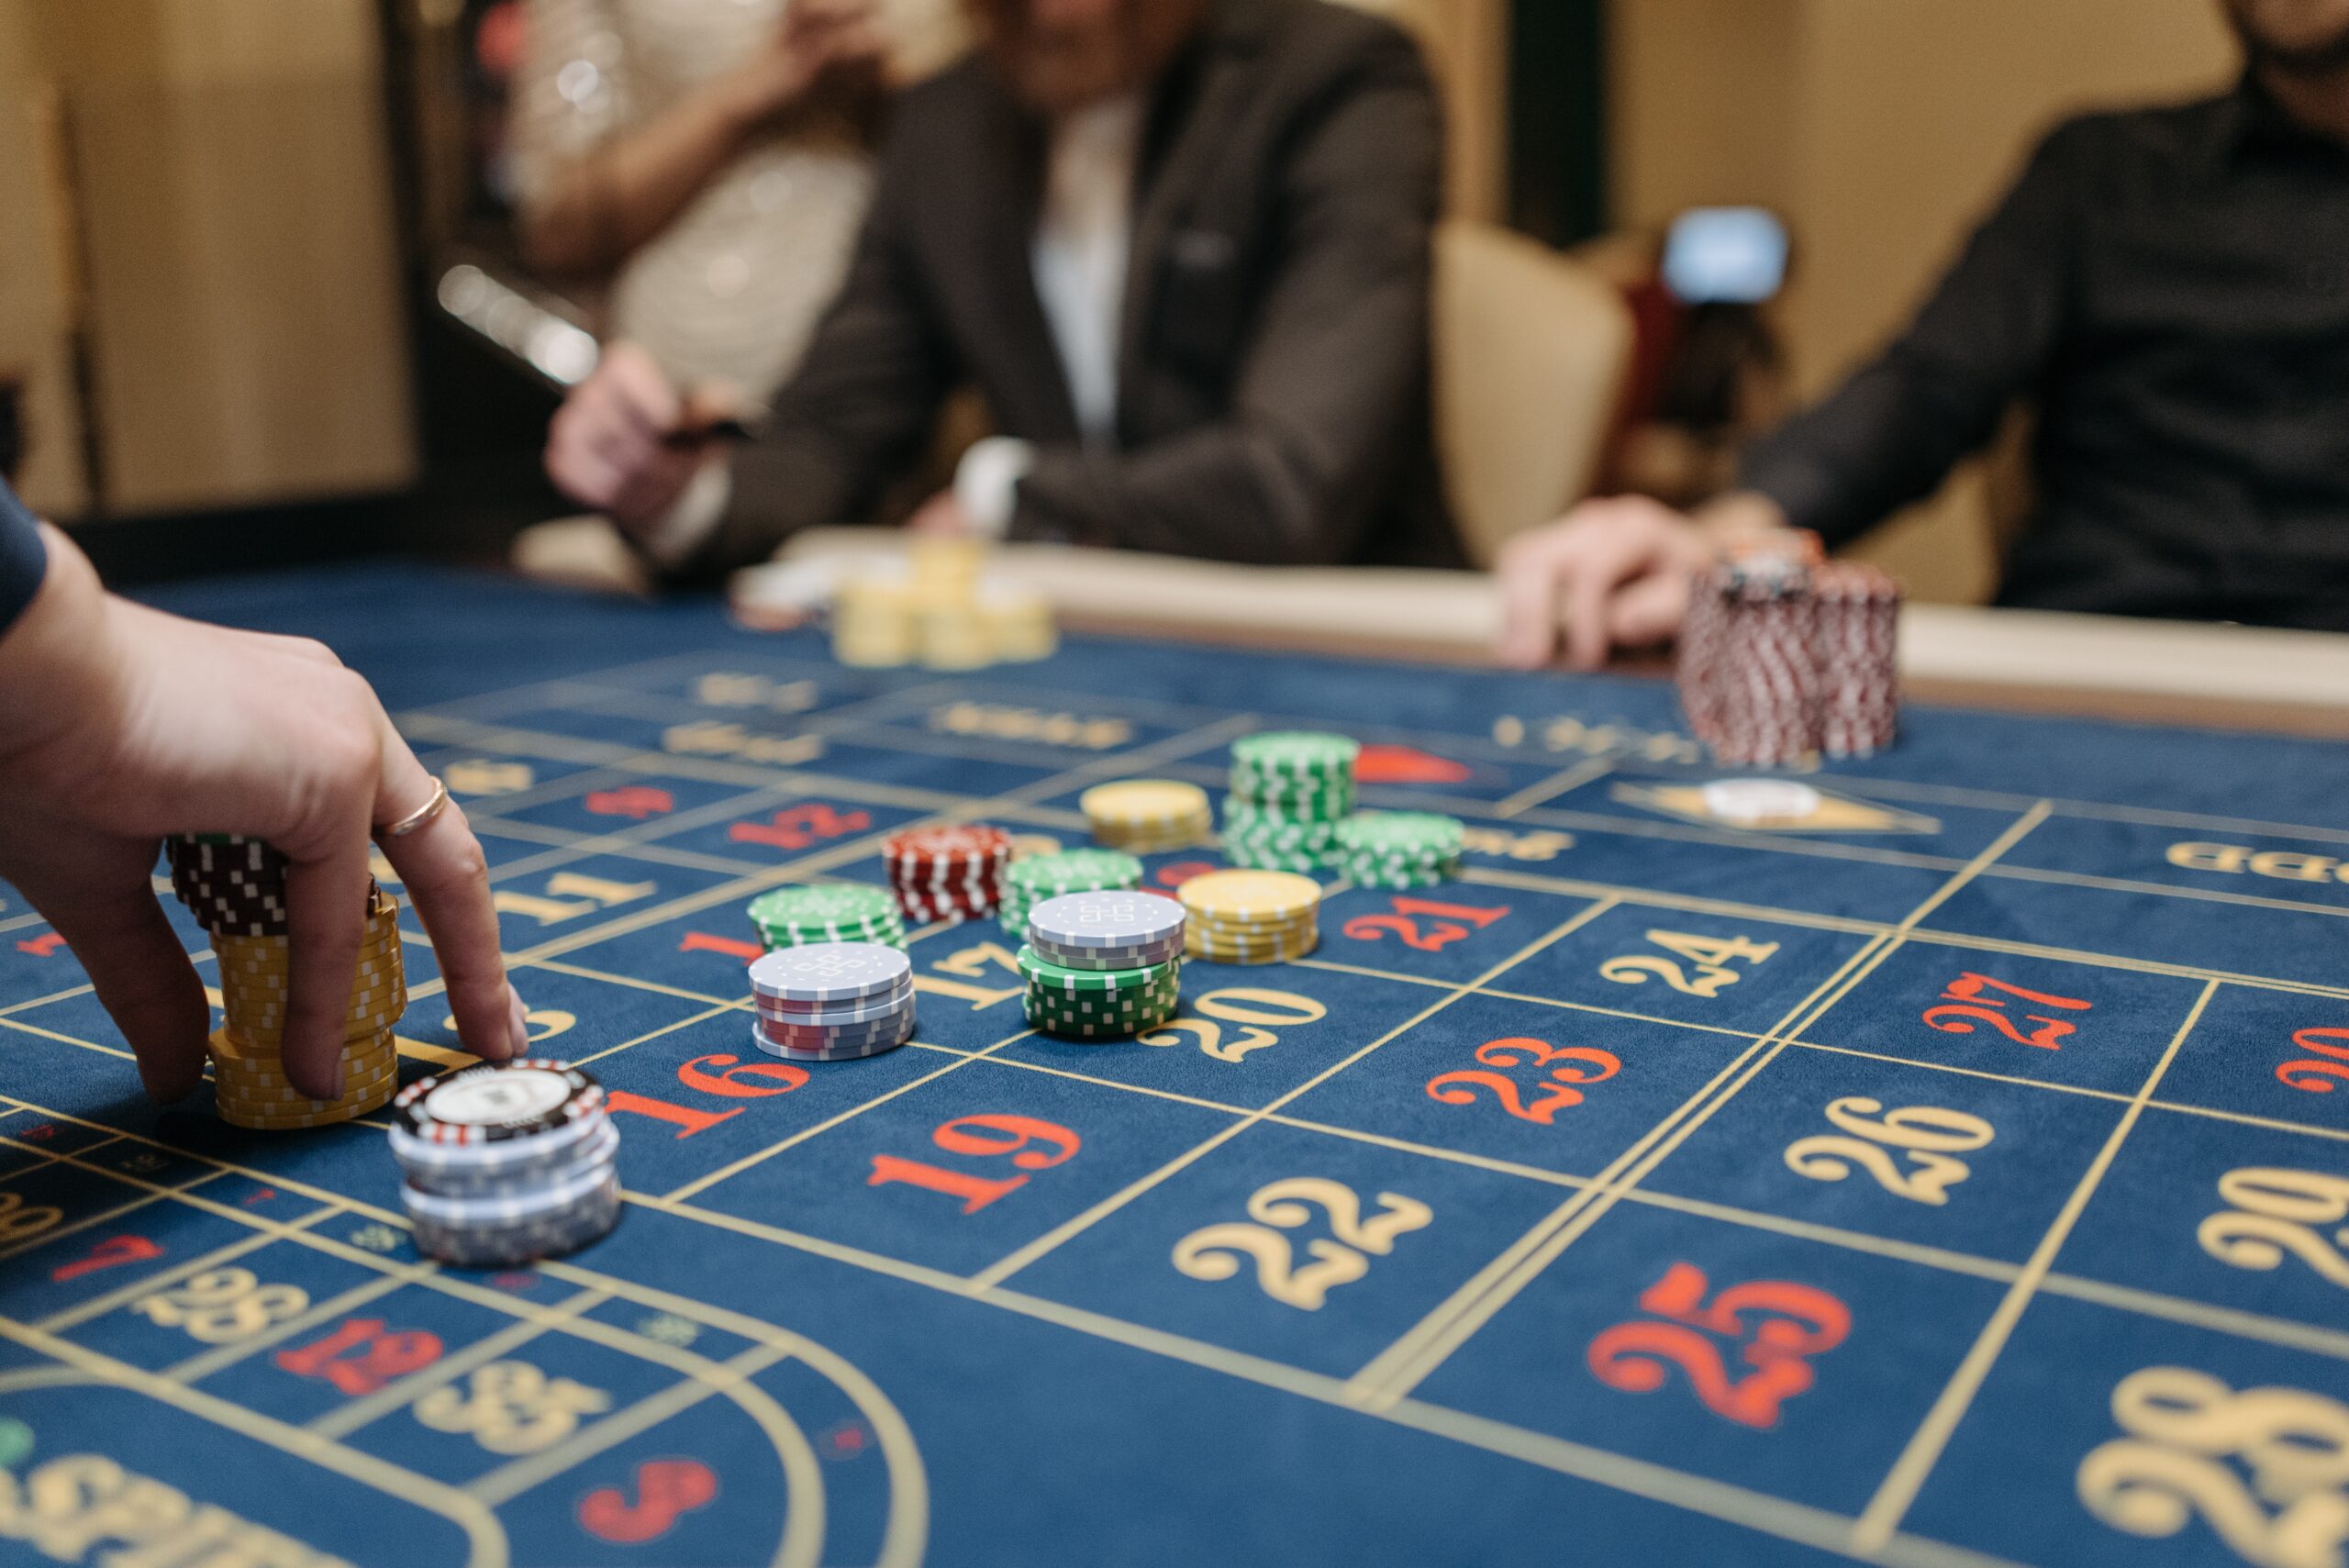 There are more than 1,000 games available at many online casinos.